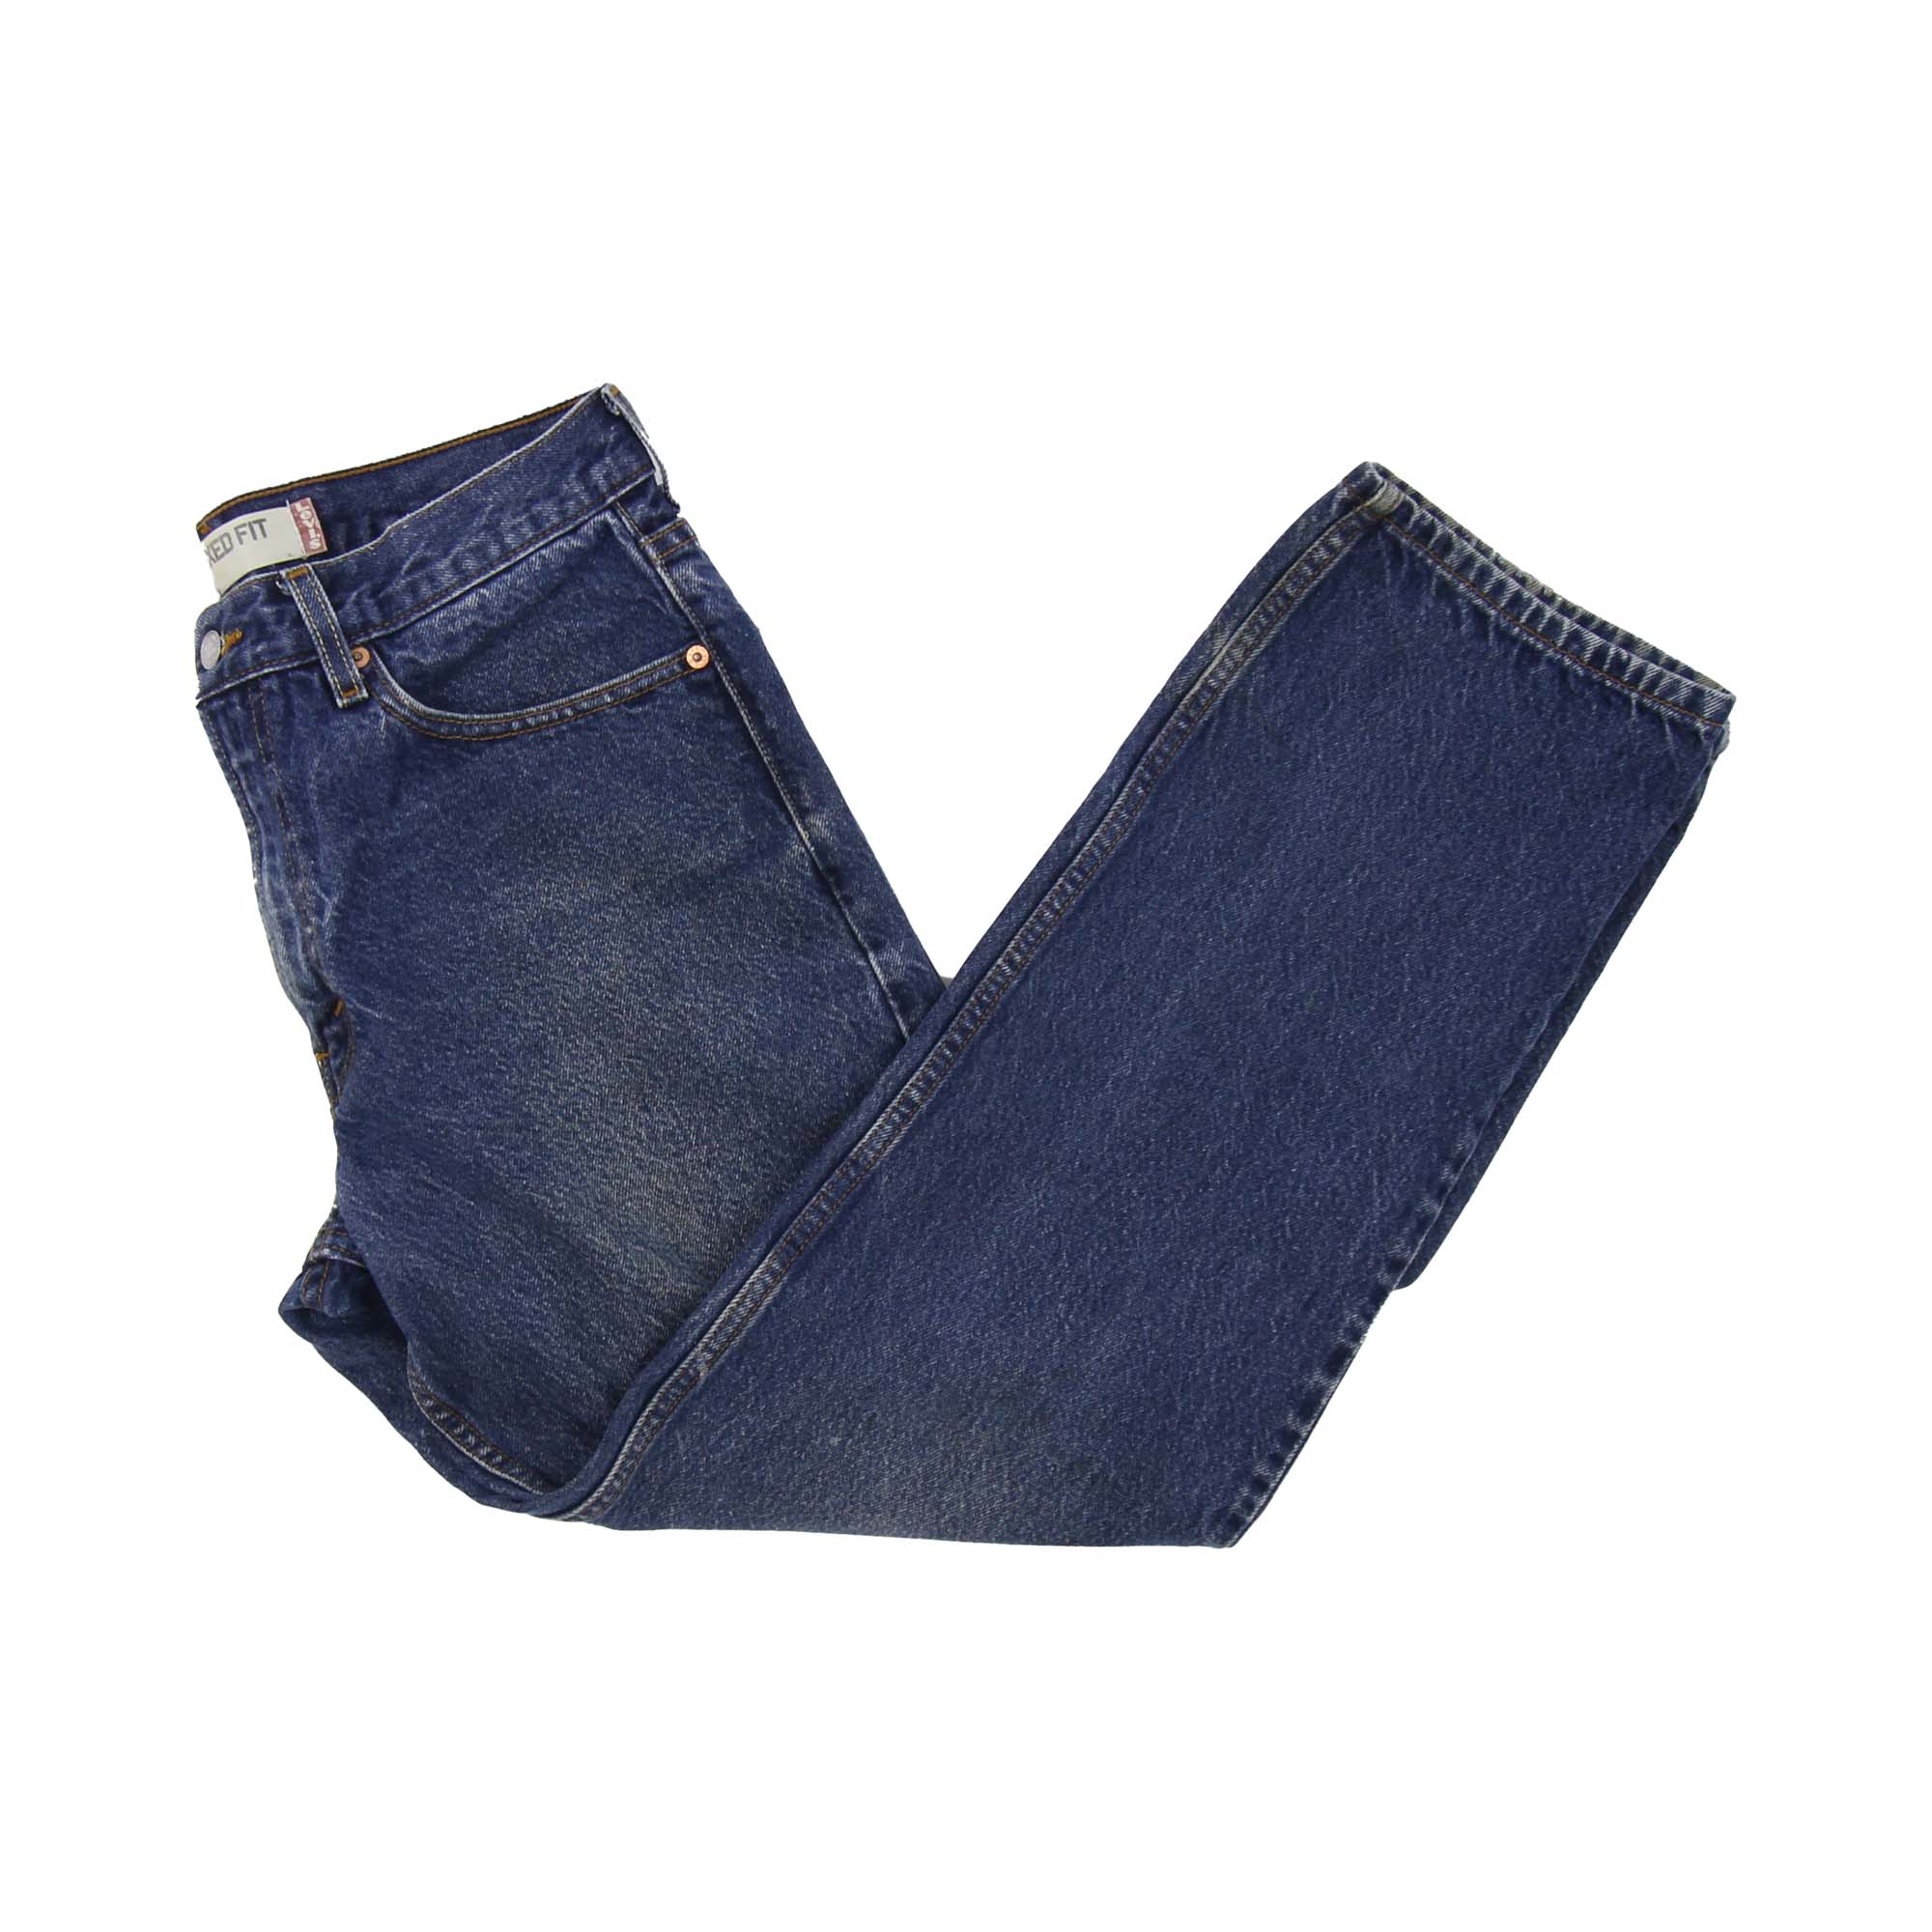 Levi's 550 Relaxed Fit Jeans - W32 L30 | W0409